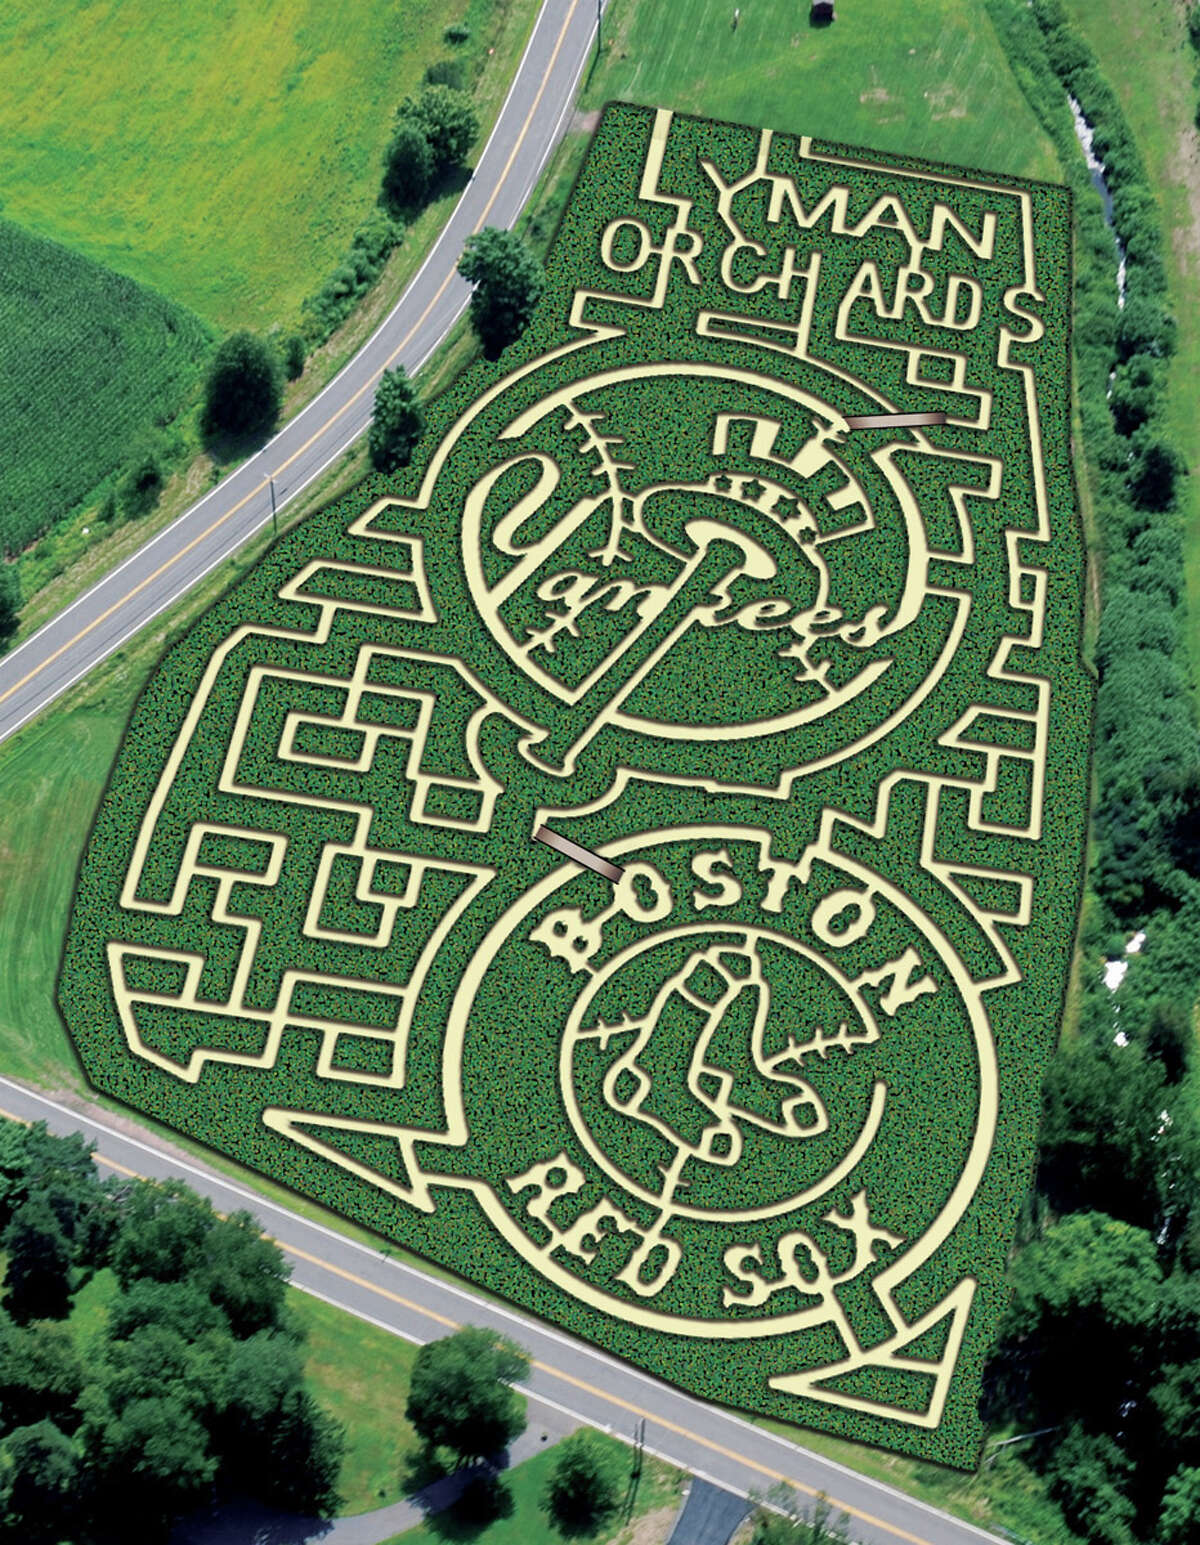 Through Nov. 4, Lyman Orchards' corn maze is open to explore in Middlefield. Find out more.